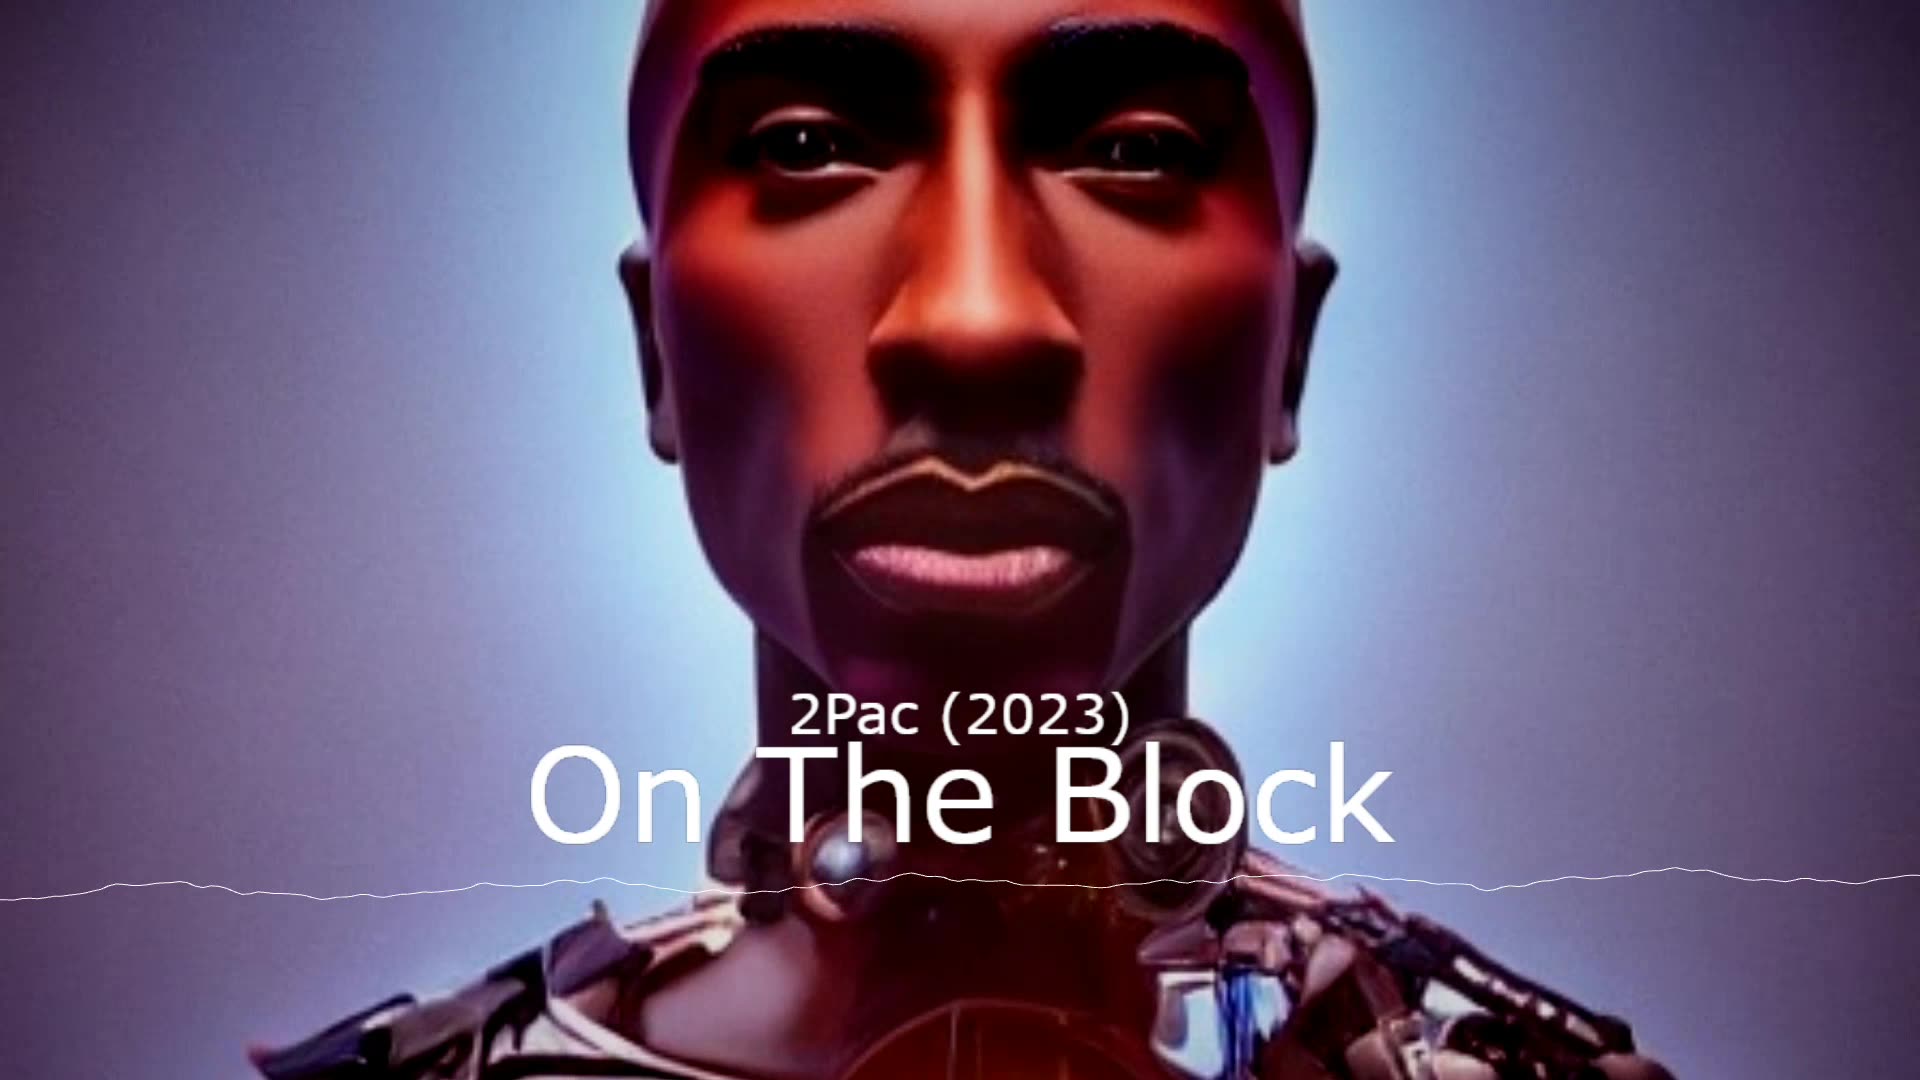 Tupac Is Alive! 2pac (2023) On The Block